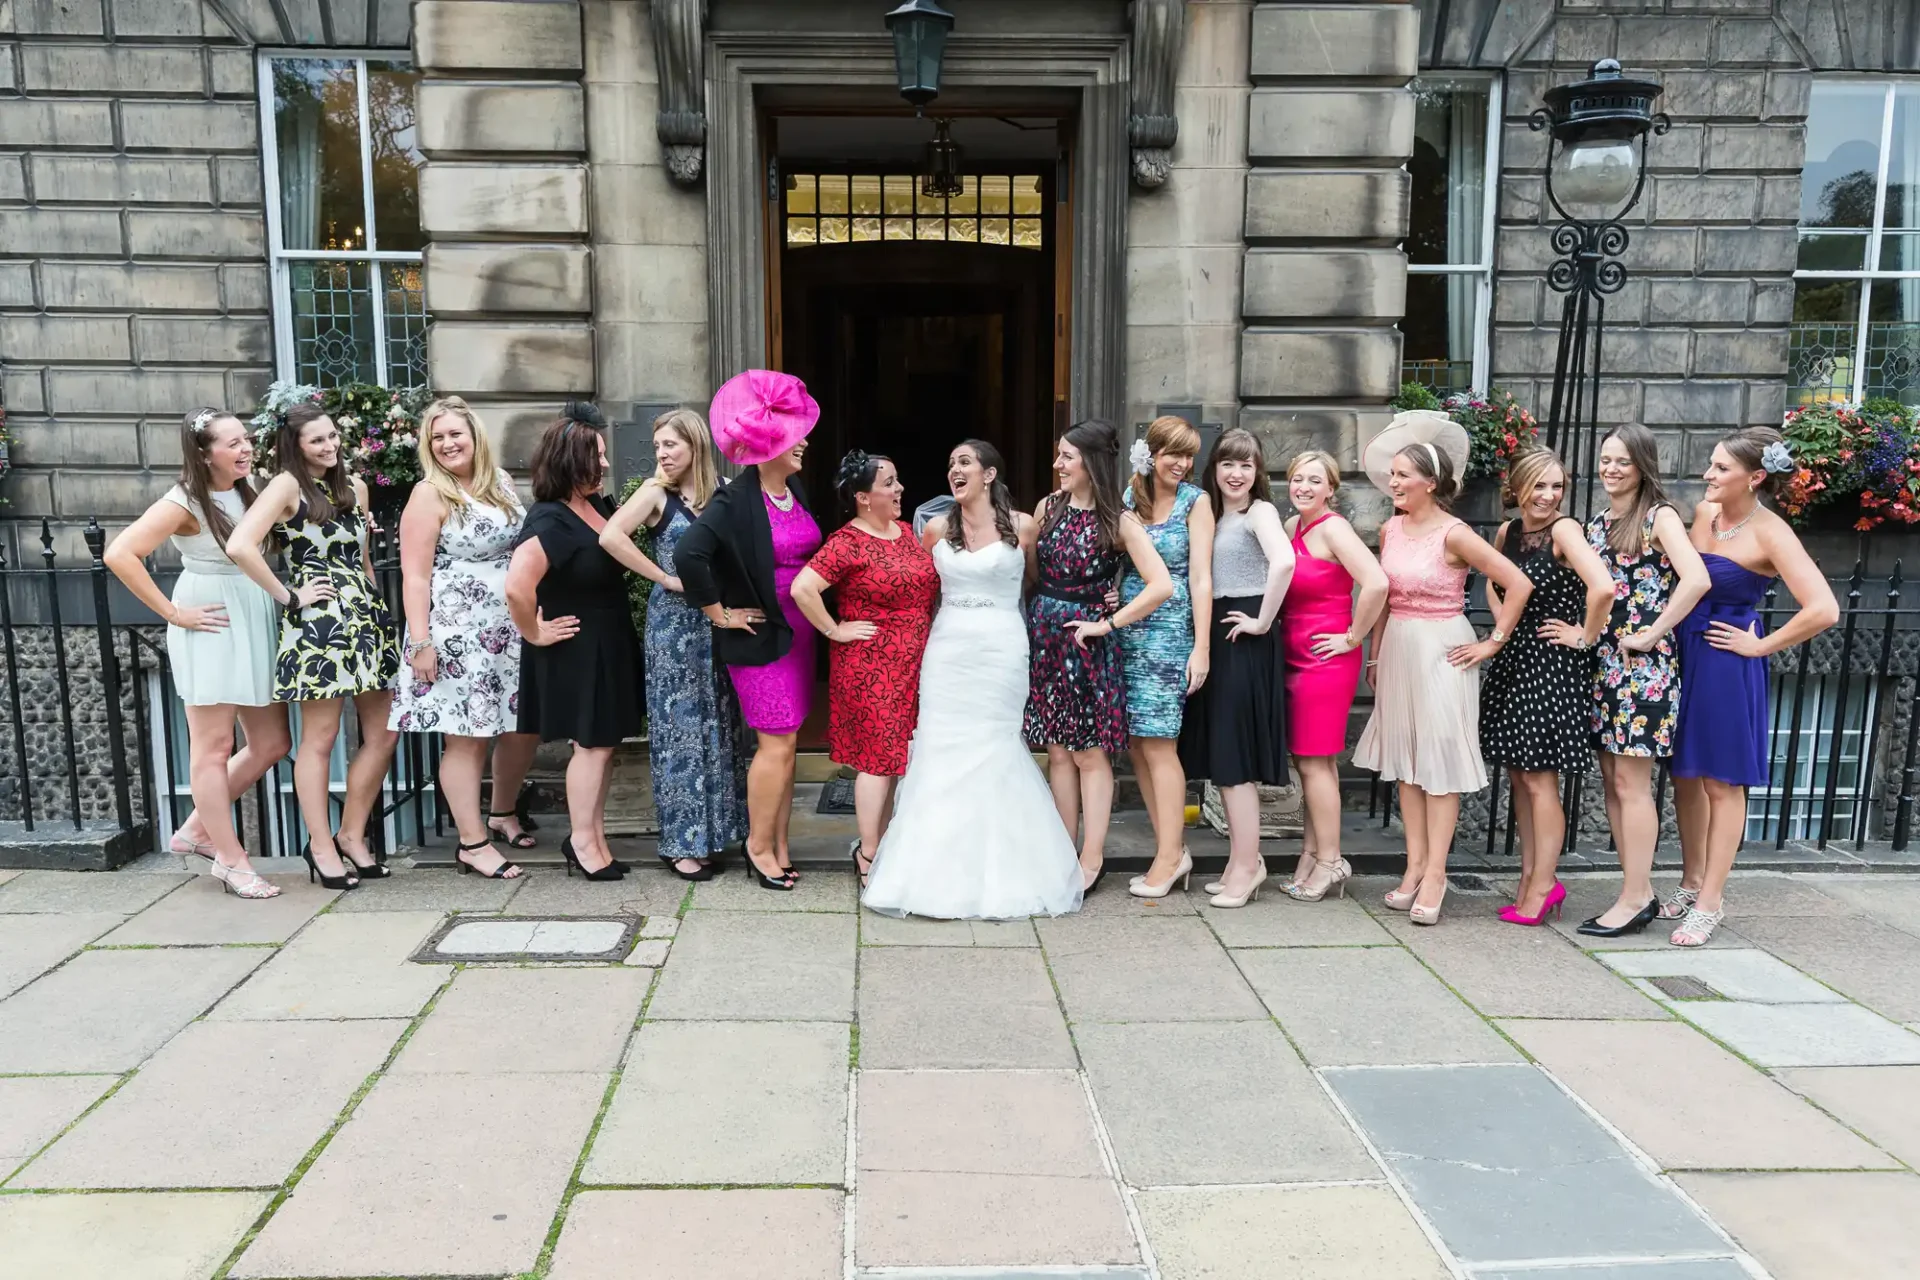 A group of women in formal attire posing happily outside a building, with one in a white wedding dress.